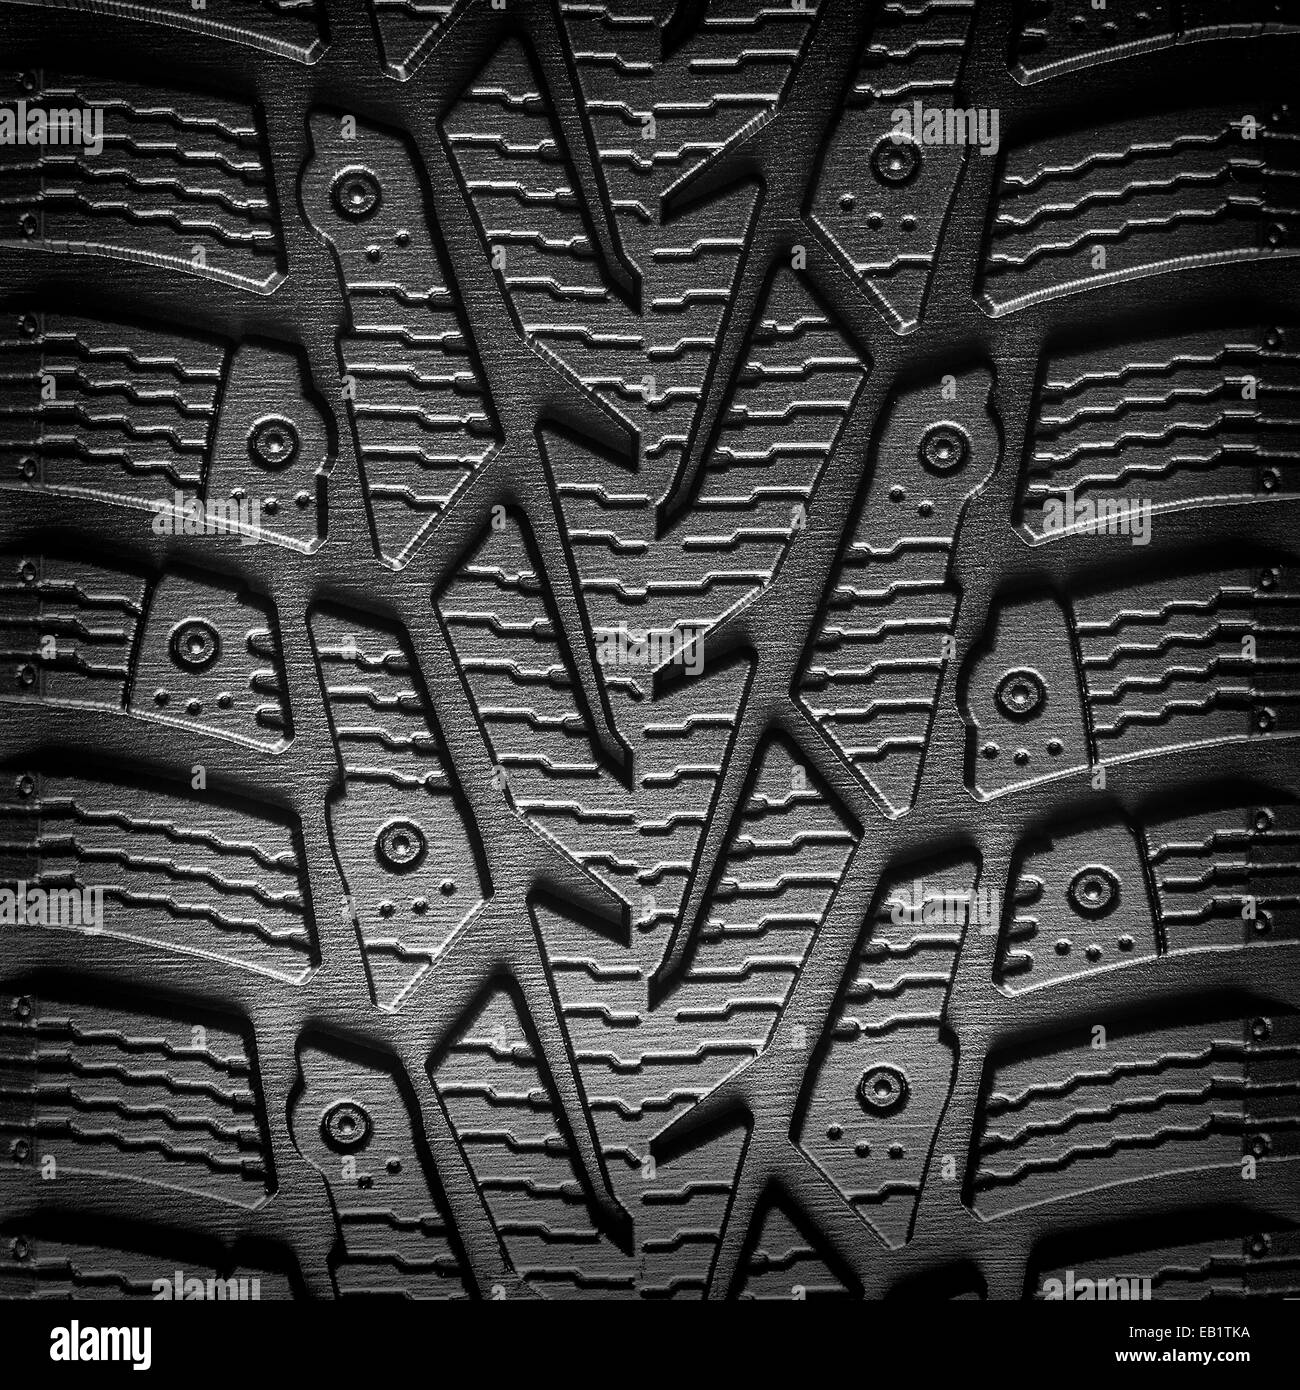 Car tire tread background closeup. Abstract concept image. Stock Photo